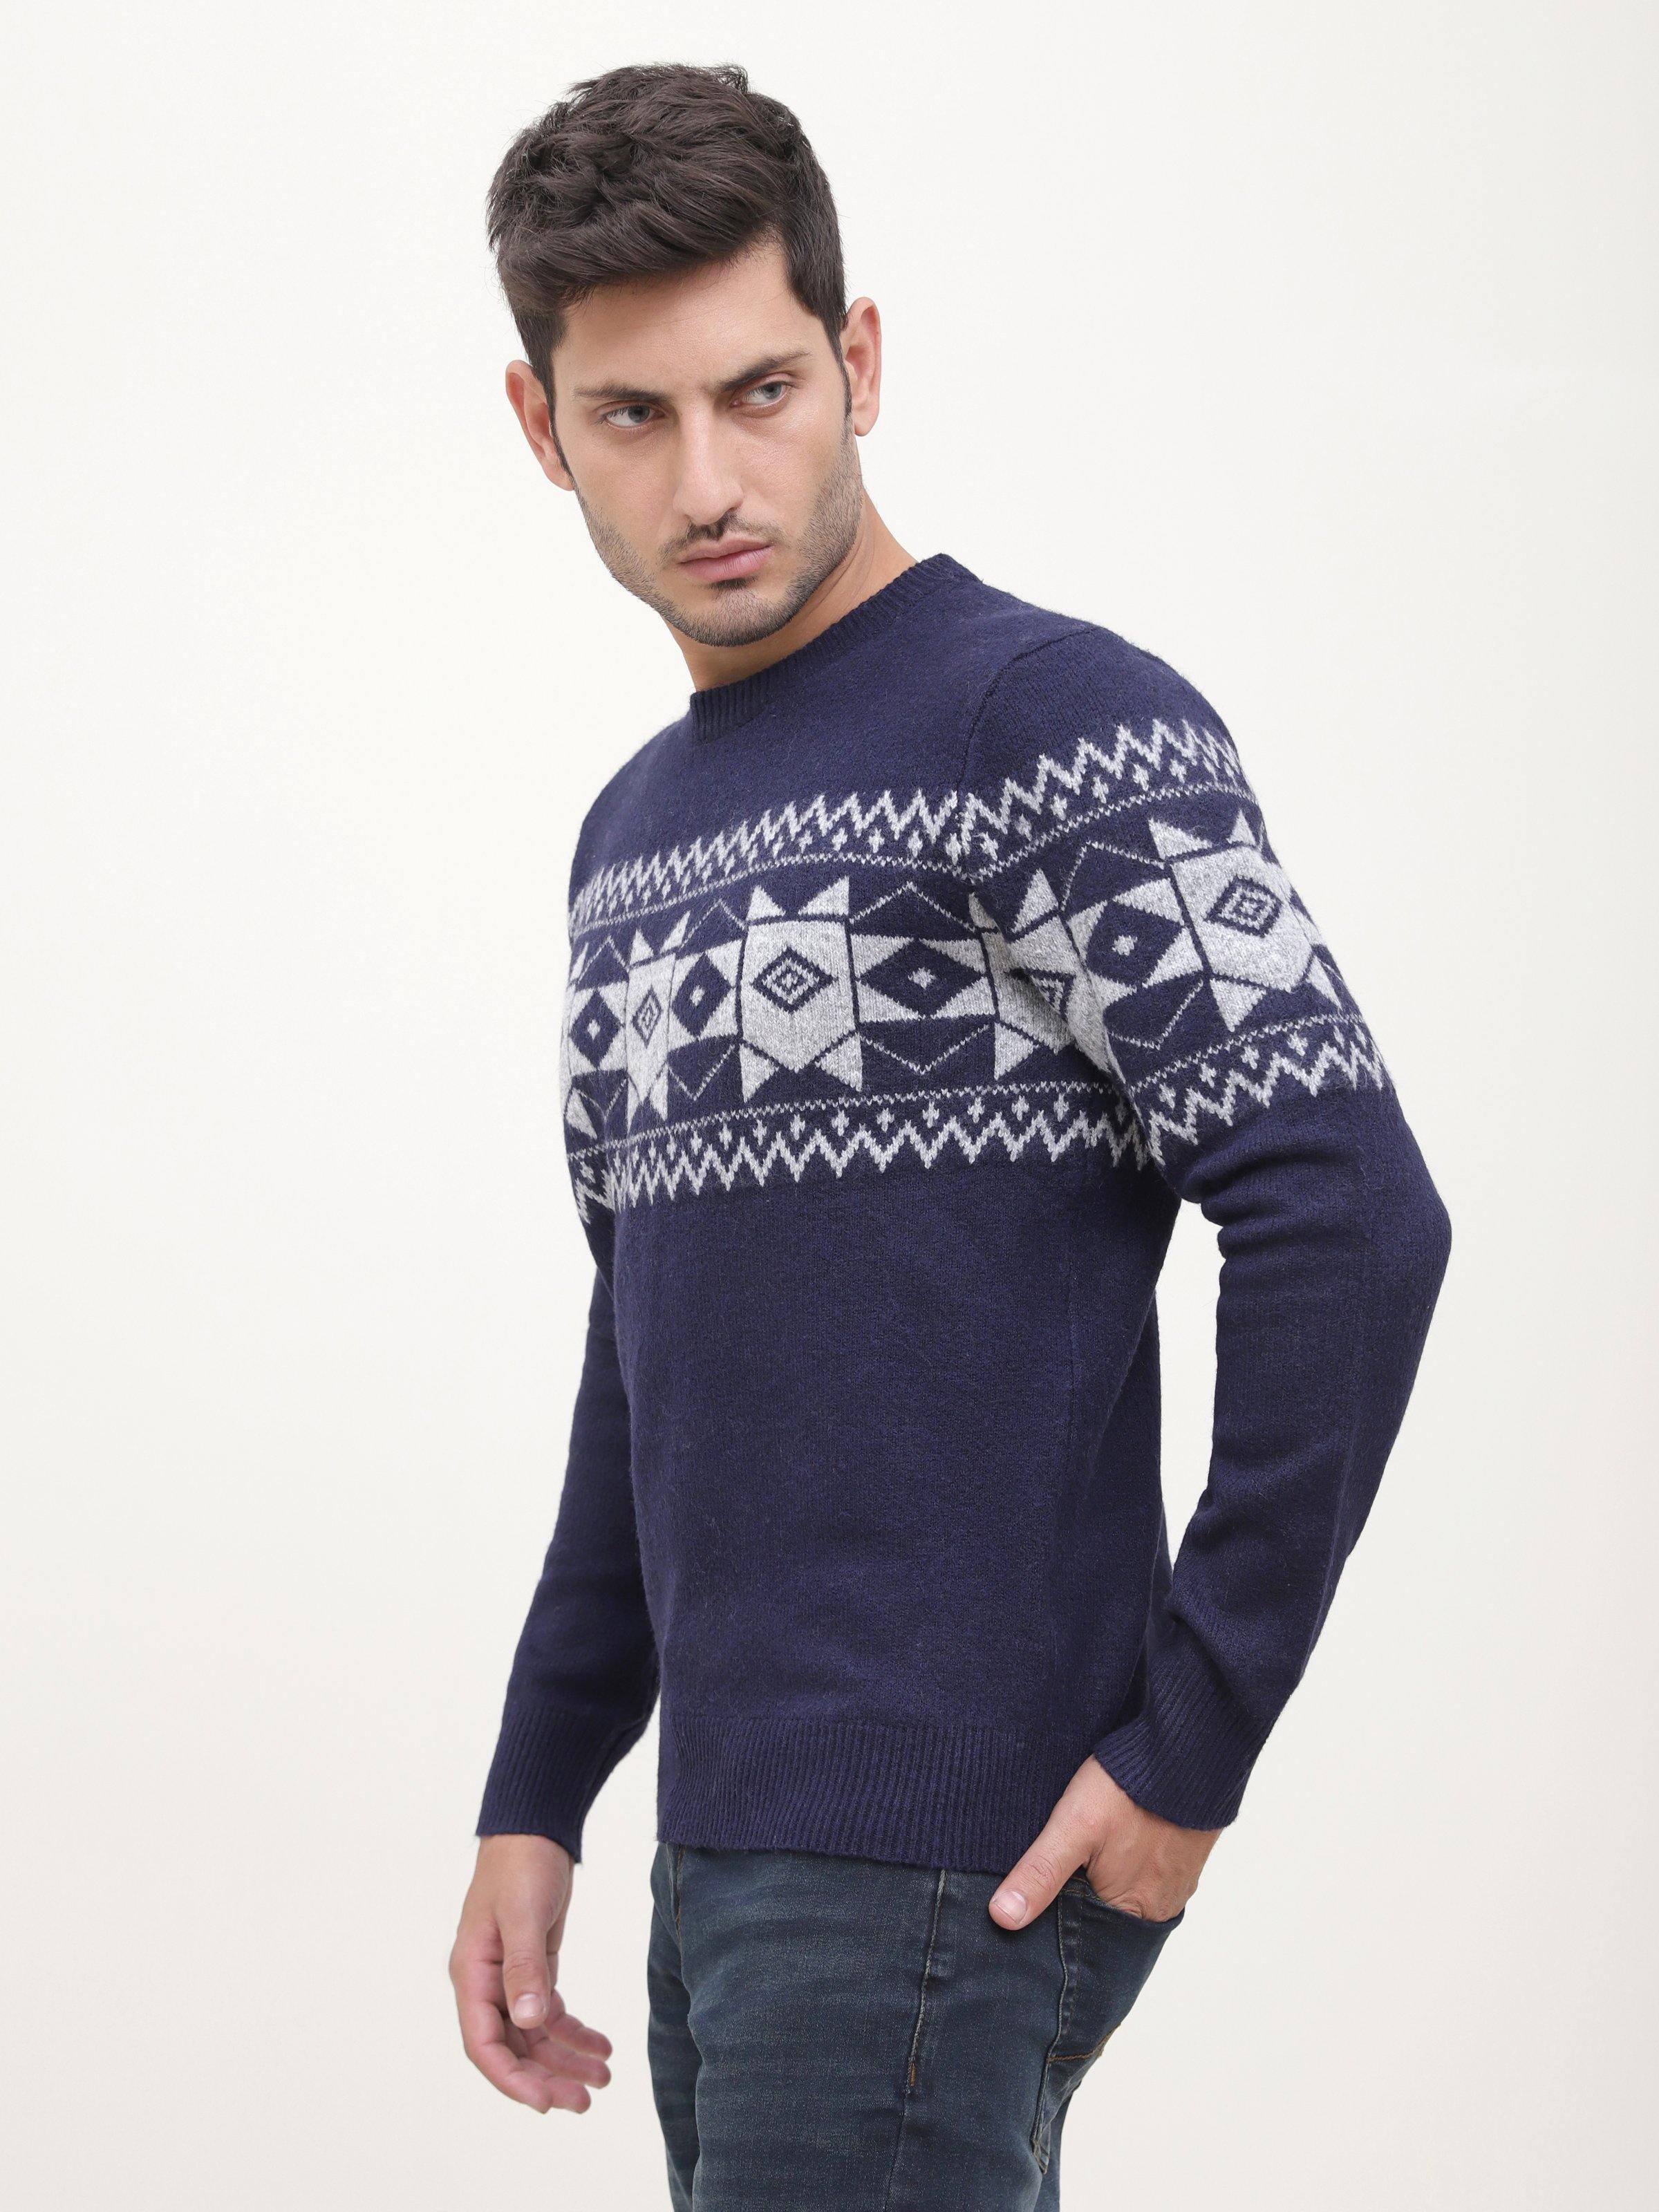 SWEATER ROUND NECK FULL SLEEVE NAVY GREY at Charcoal Clothing